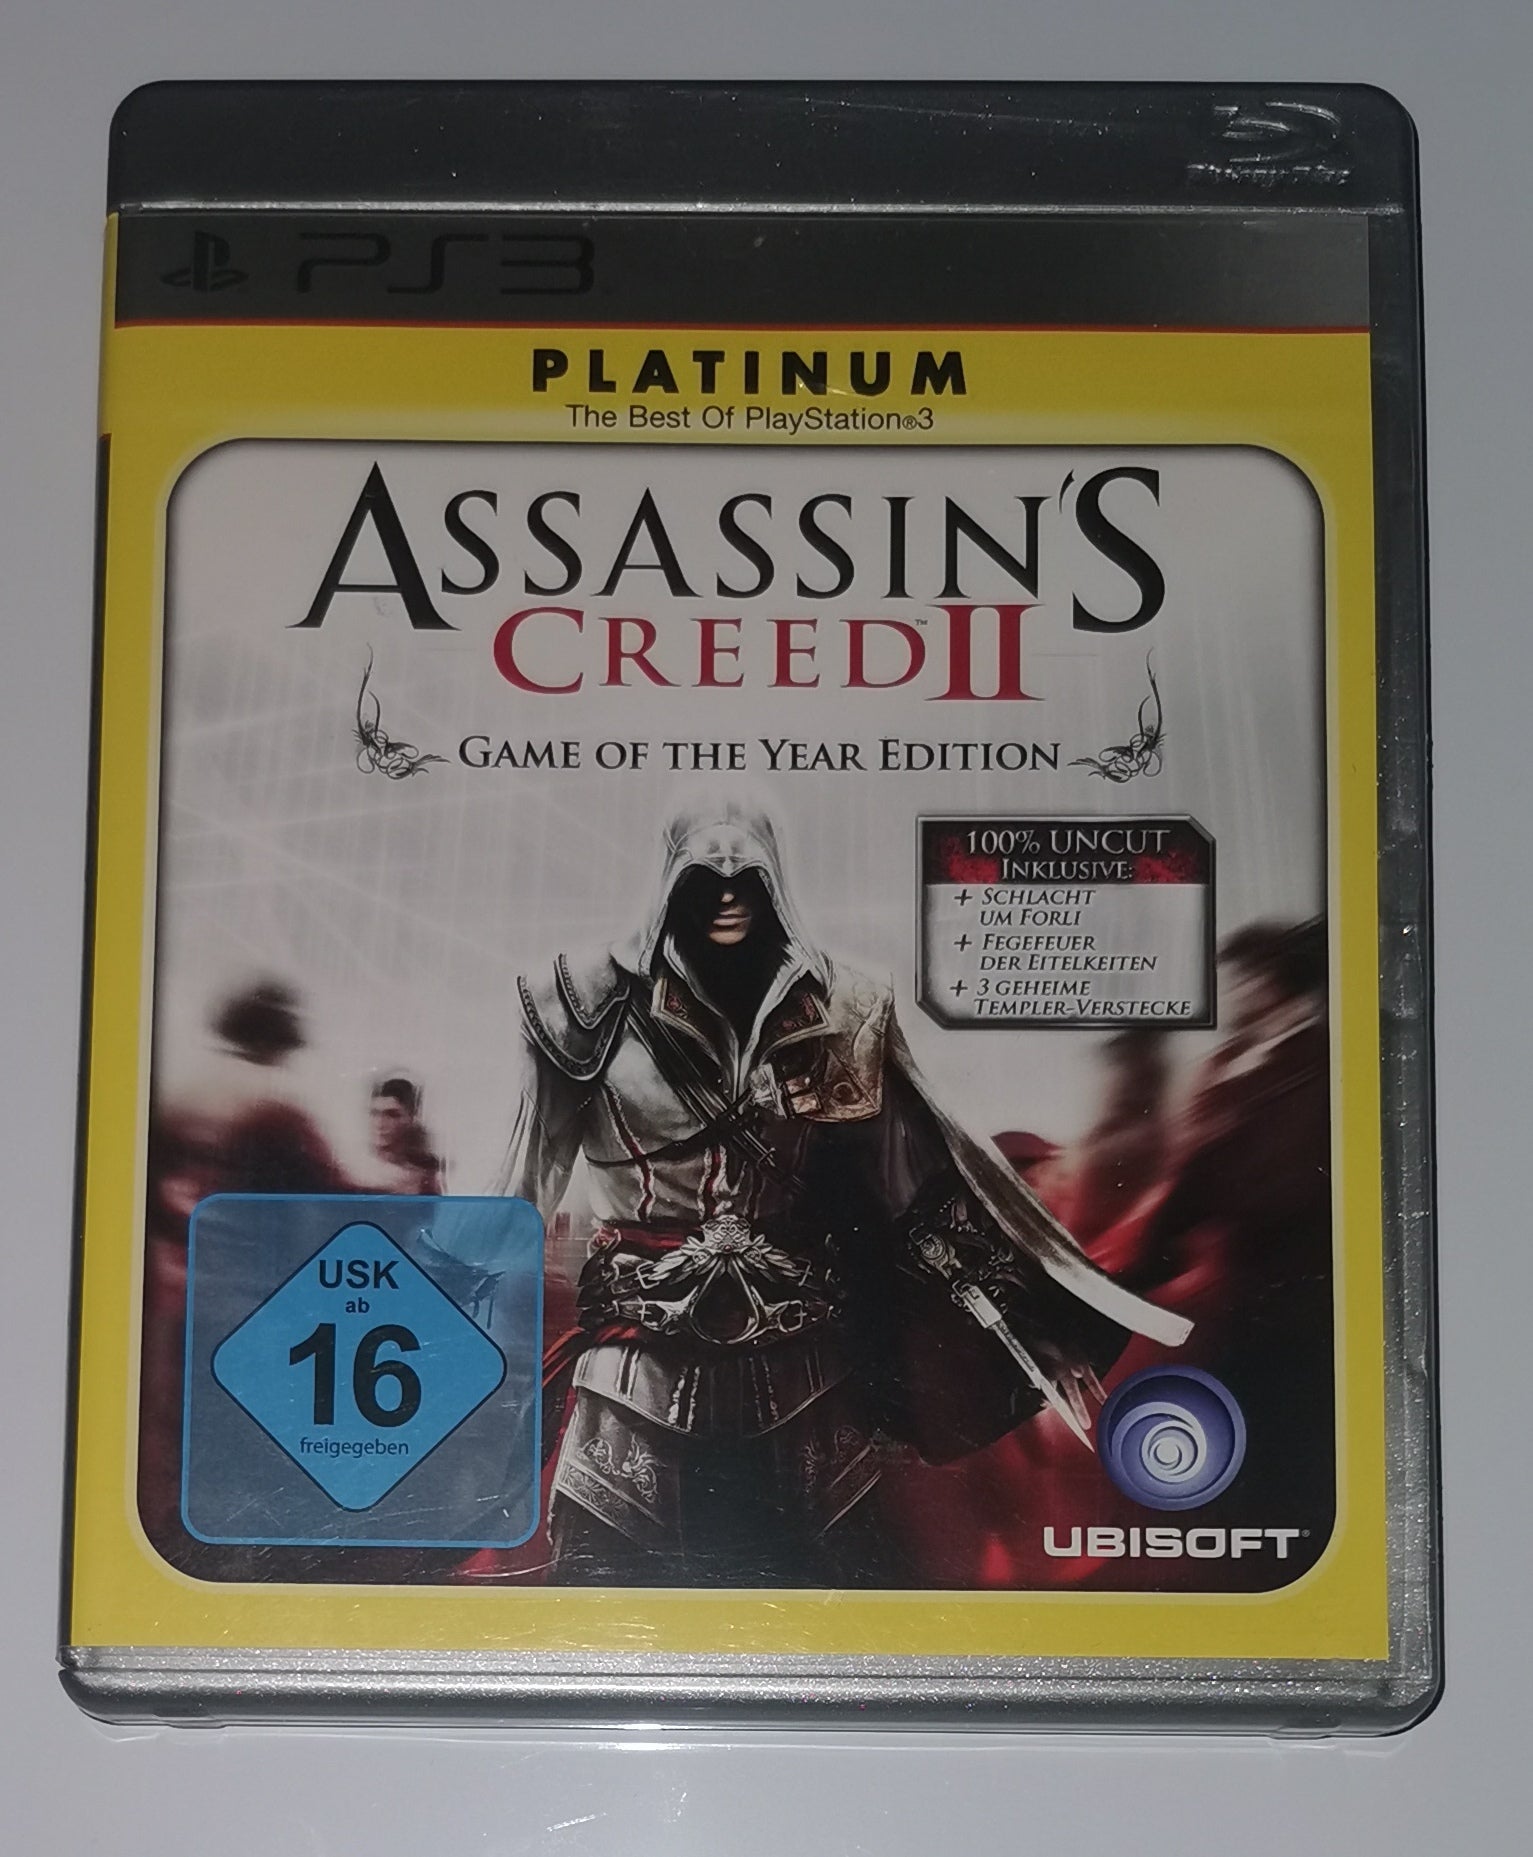 Assassins Creed 2 Game of the Year Edition PS3 Playstation (Playstation 3) [Gut]